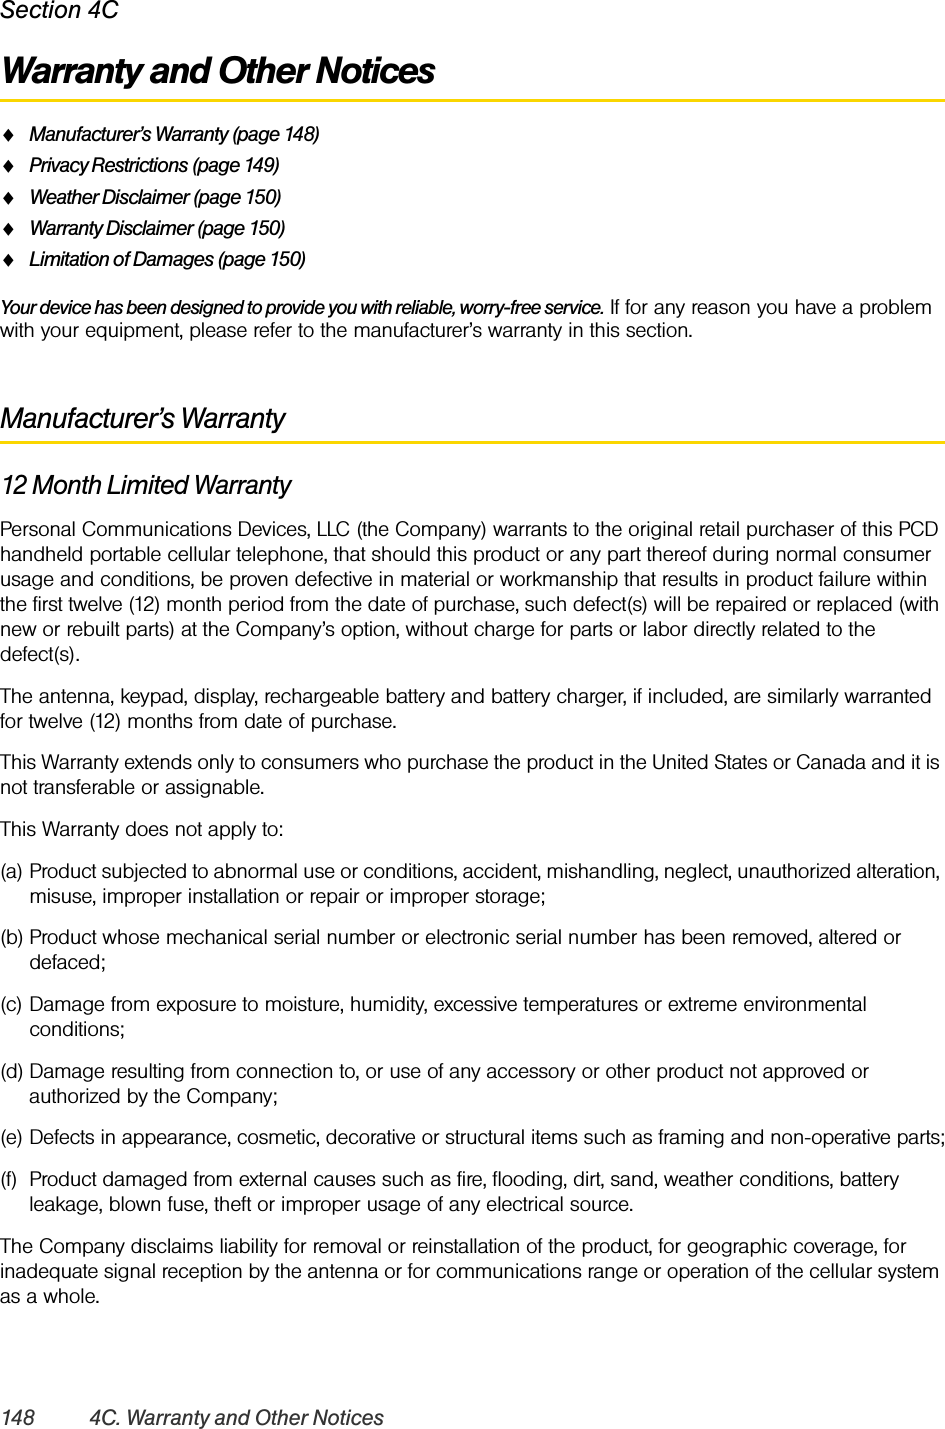 148 4C. Warranty and Other NoticesSection 4CWarranty and Other NoticesࡗManufacturer’s Warranty (page 148)ࡗPrivacy Restrictions (page 149)ࡗWeather Disclaimer (page 150)ࡗWarranty Disclaimer (page 150)ࡗLimitation of Damages (page 150)Your device has been designed to provide you with reliable, worry-free service. If for any reason you have a problem with your equipment, please refer to the manufacturer’s warranty in this section.Manufacturer’s Warranty12 Month Limited WarrantyPersonal Communications Devices, LLC (the Company) warrants to the original retail purchaser of this PCD handheld portable cellular telephone, that should this product or any part thereof during normal consumer usage and conditions, be proven defective in material or workmanship that results in product failure within the first twelve (12) month period from the date of purchase, such defect(s) will be repaired or replaced (with new or rebuilt parts) at the Company’s option, without charge for parts or labor directly related to the defect(s).The antenna, keypad, display, rechargeable battery and battery charger, if included, are similarly warranted for twelve (12) months from date of purchase.This Warranty extends only to consumers who purchase the product in the United States or Canada and it is not transferable or assignable.This Warranty does not apply to:(a) Product subjected to abnormal use or conditions, accident, mishandling, neglect, unauthorized alteration, misuse, improper installation or repair or improper storage;(b) Product whose mechanical serial number or electronic serial number has been removed, altered or defaced;(c) Damage from exposure to moisture, humidity, excessive temperatures or extreme environmental conditions;(d) Damage resulting from connection to, or use of any accessory or other product not approved or authorized by the Company;(e) Defects in appearance, cosmetic, decorative or structural items such as framing and non-operative parts;(f) Product damaged from external causes such as fire, flooding, dirt, sand, weather conditions, battery leakage, blown fuse, theft or improper usage of any electrical source.The Company disclaims liability for removal or reinstallation of the product, for geographic coverage, for inadequate signal reception by the antenna or for communications range or operation of the cellular system as a whole.